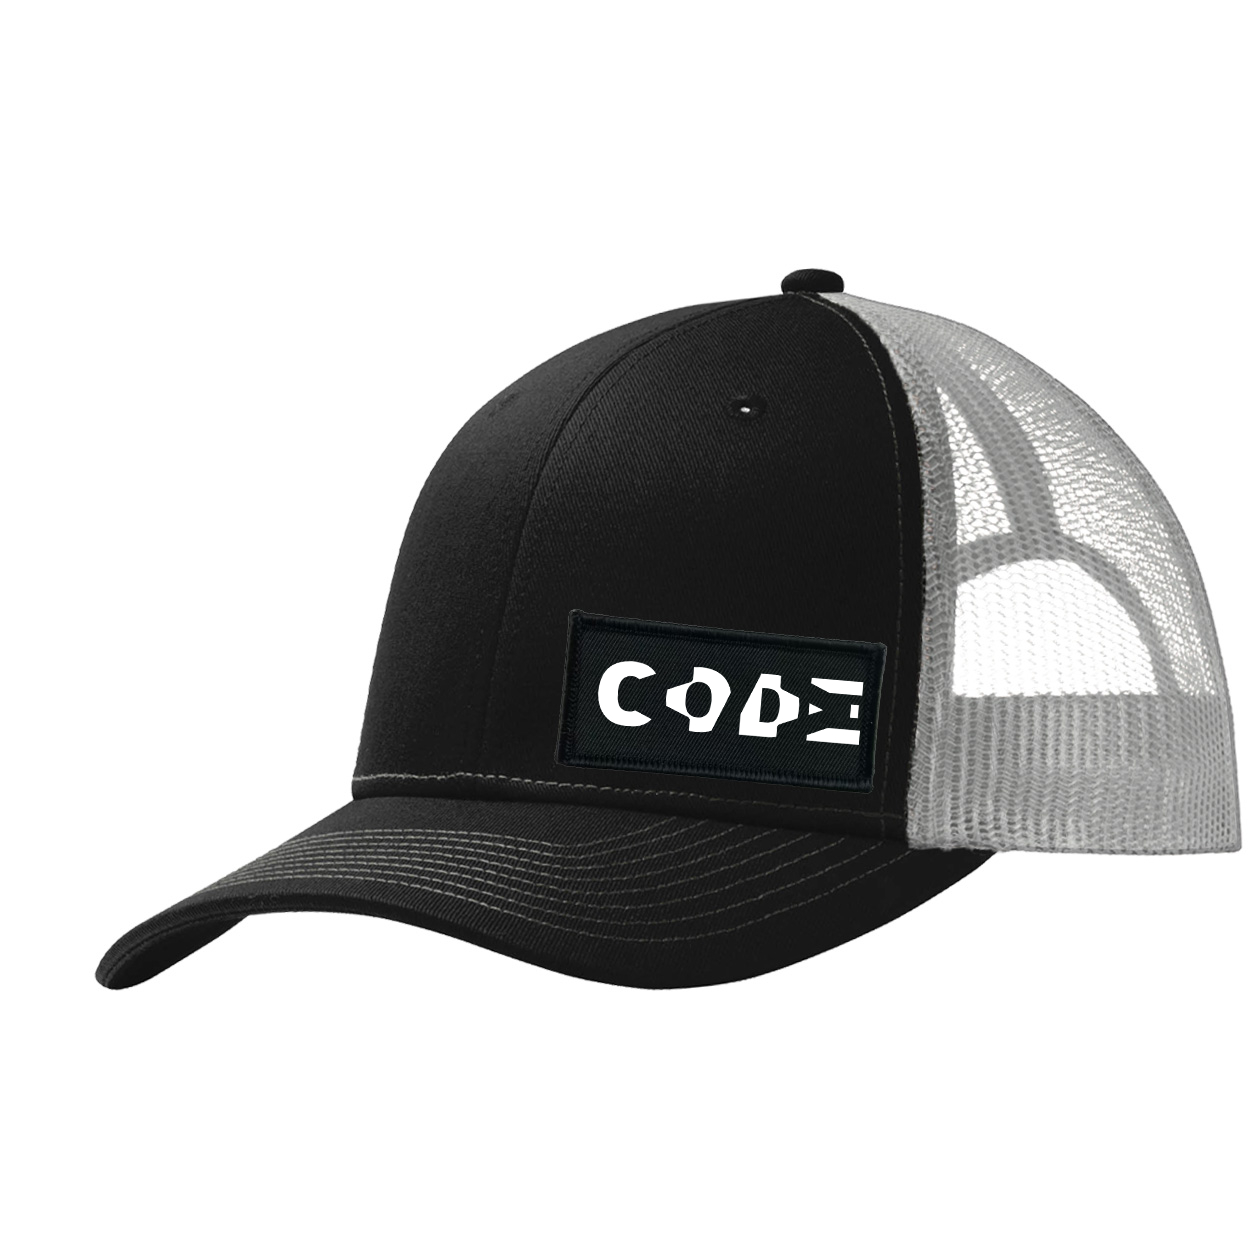 Code Tag Logo Night Out Woven Patch Snapback Trucker Hat Black/Gray